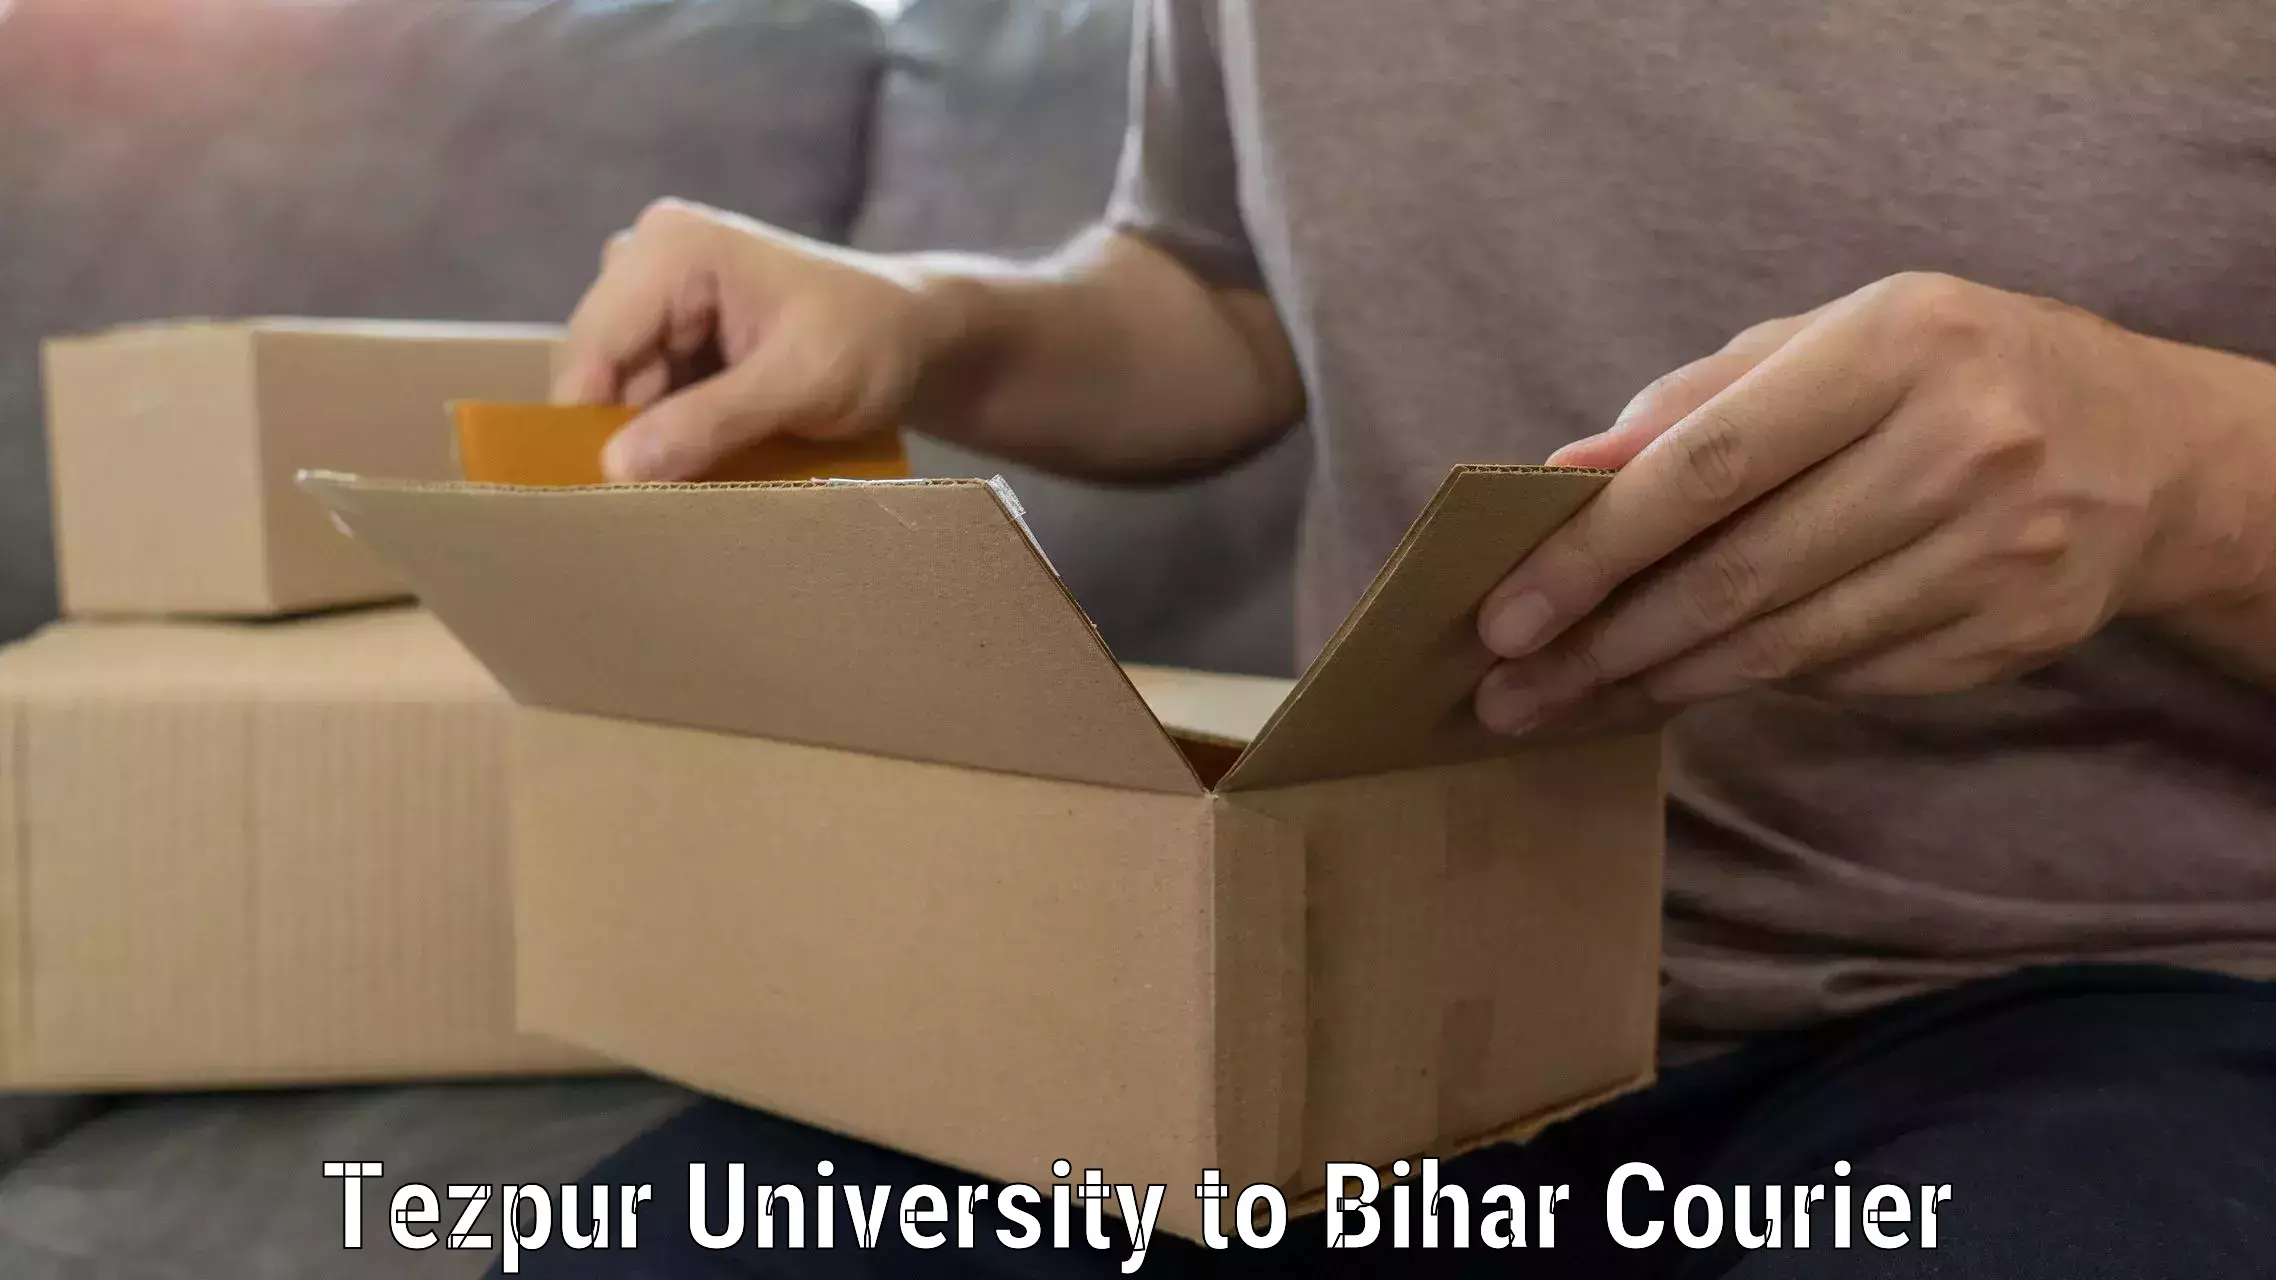 Stress-free household moving Tezpur University to Chainpur